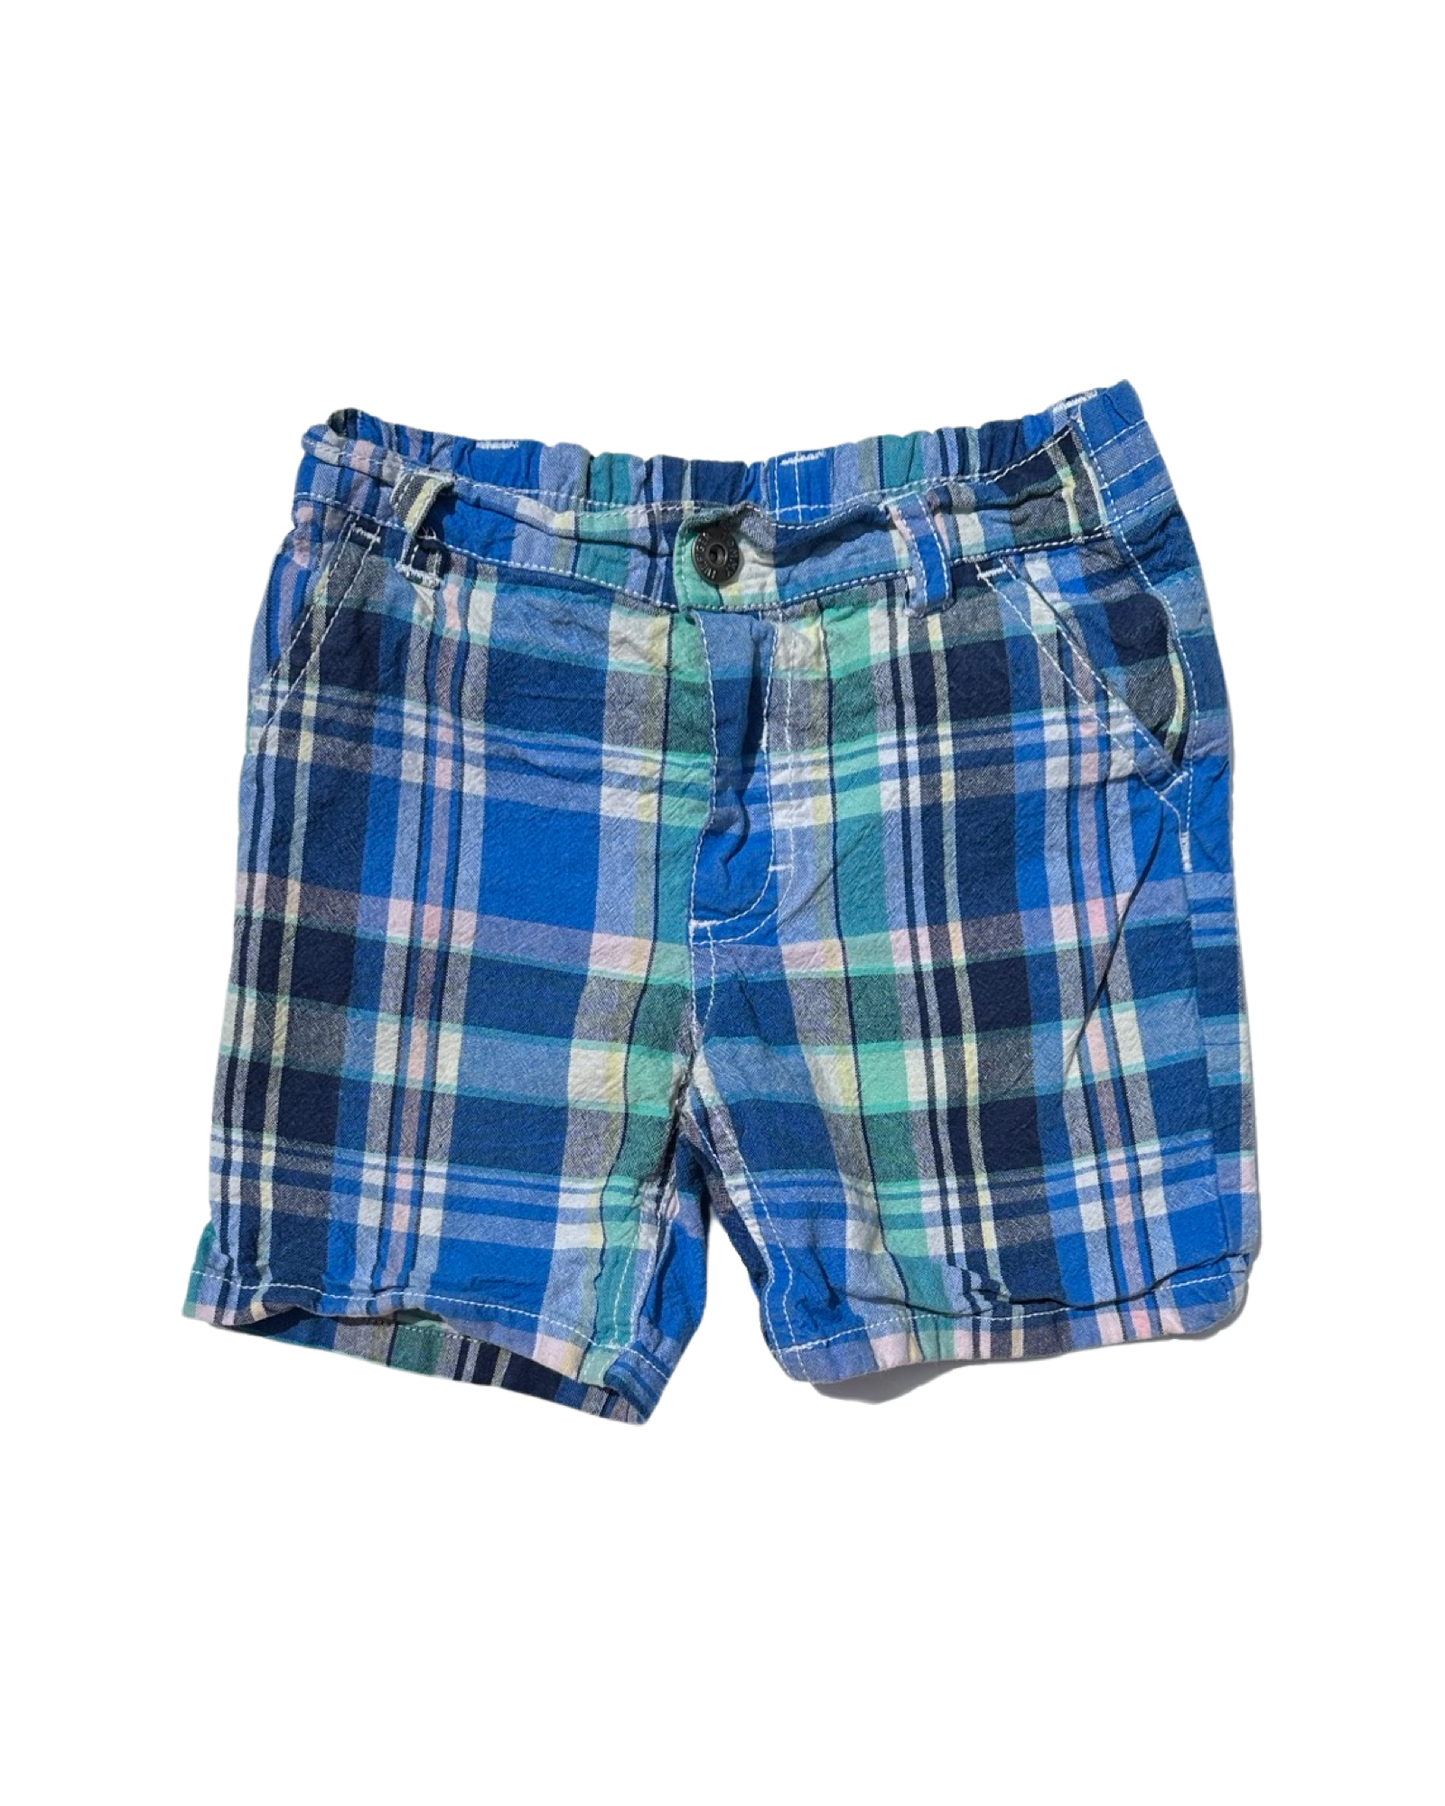 Tommy Hilfiger checked cotton shorts (size 18-24mths)